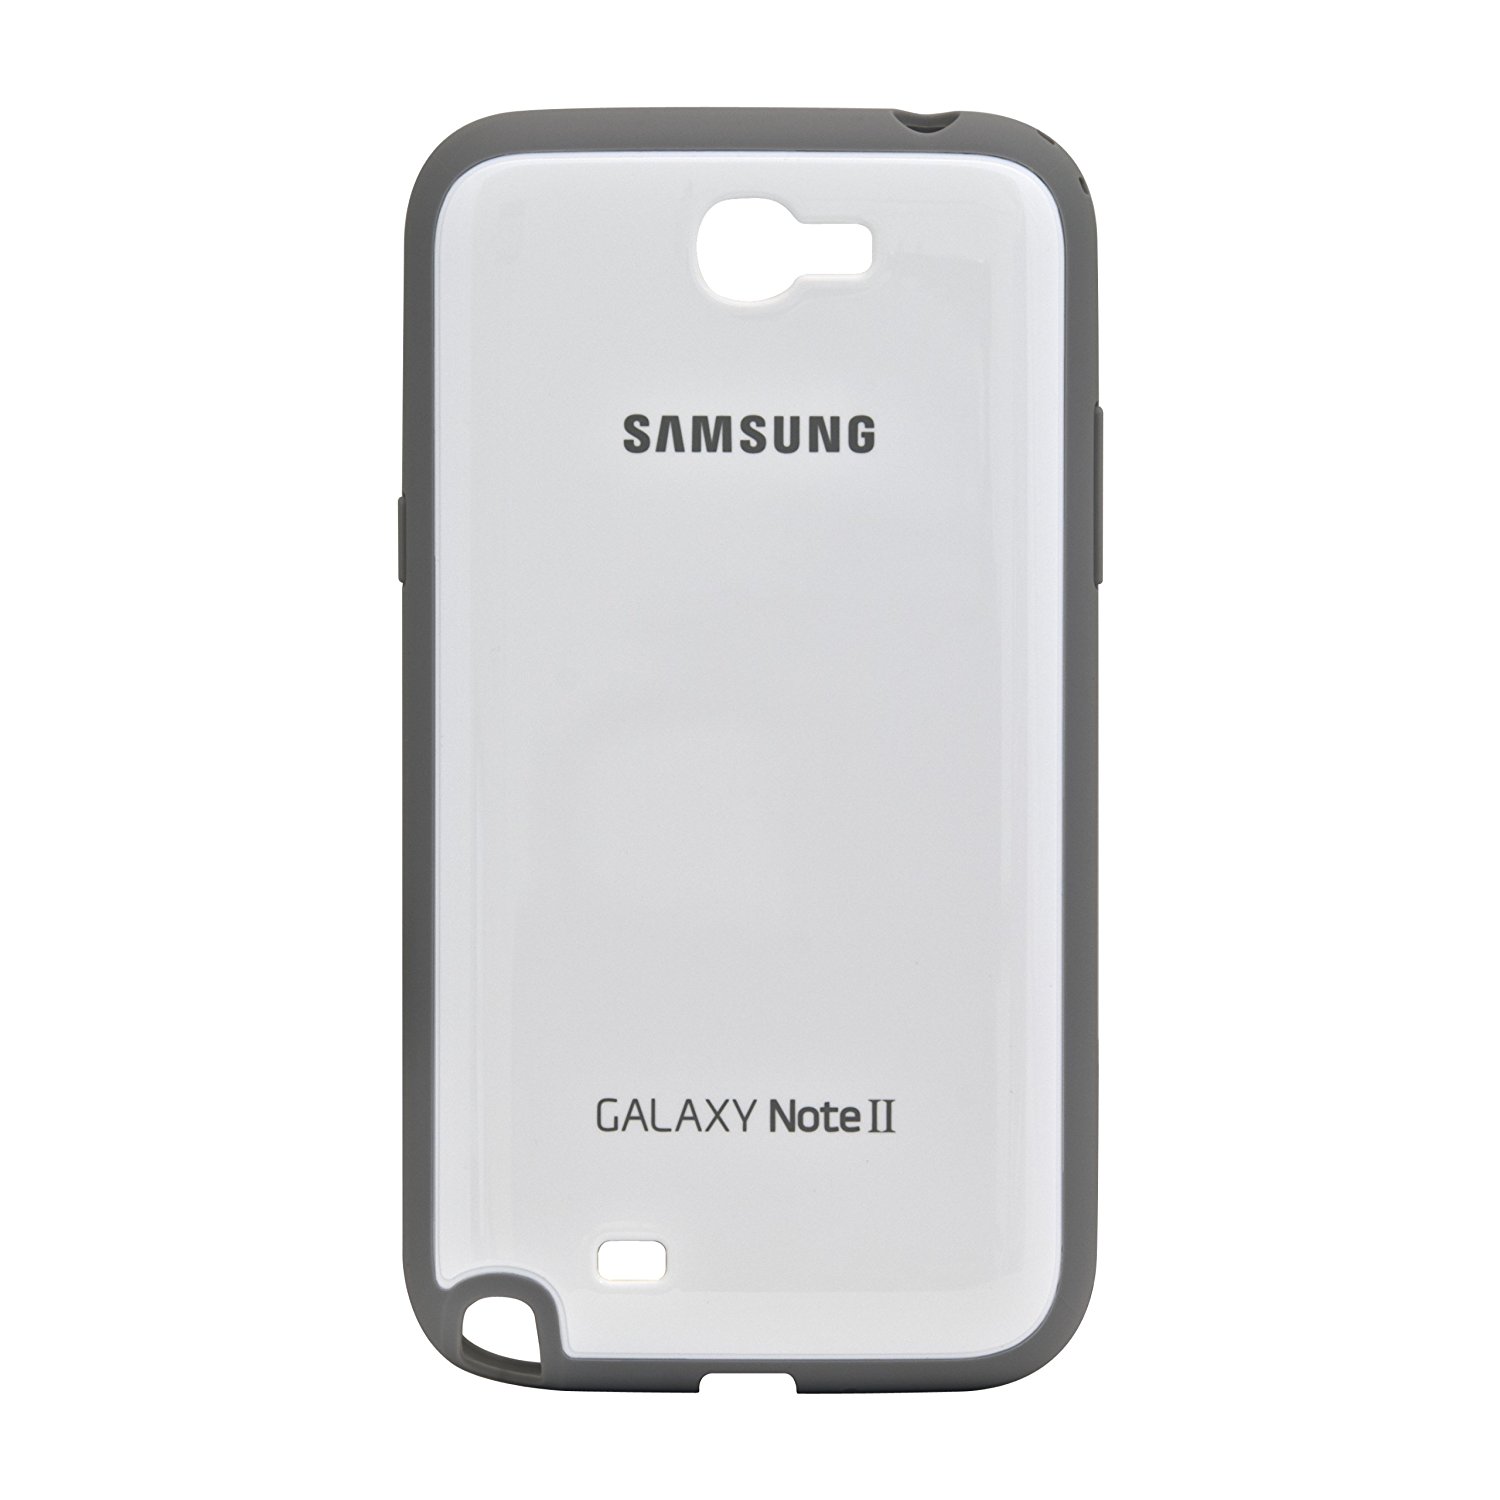 Amazon clipartlook.com: Galaxy Note 2 Protective Bumper Cover Plus Case (White)  (Discontinued by Manufacturer): Cell Phones u0026 Accessories